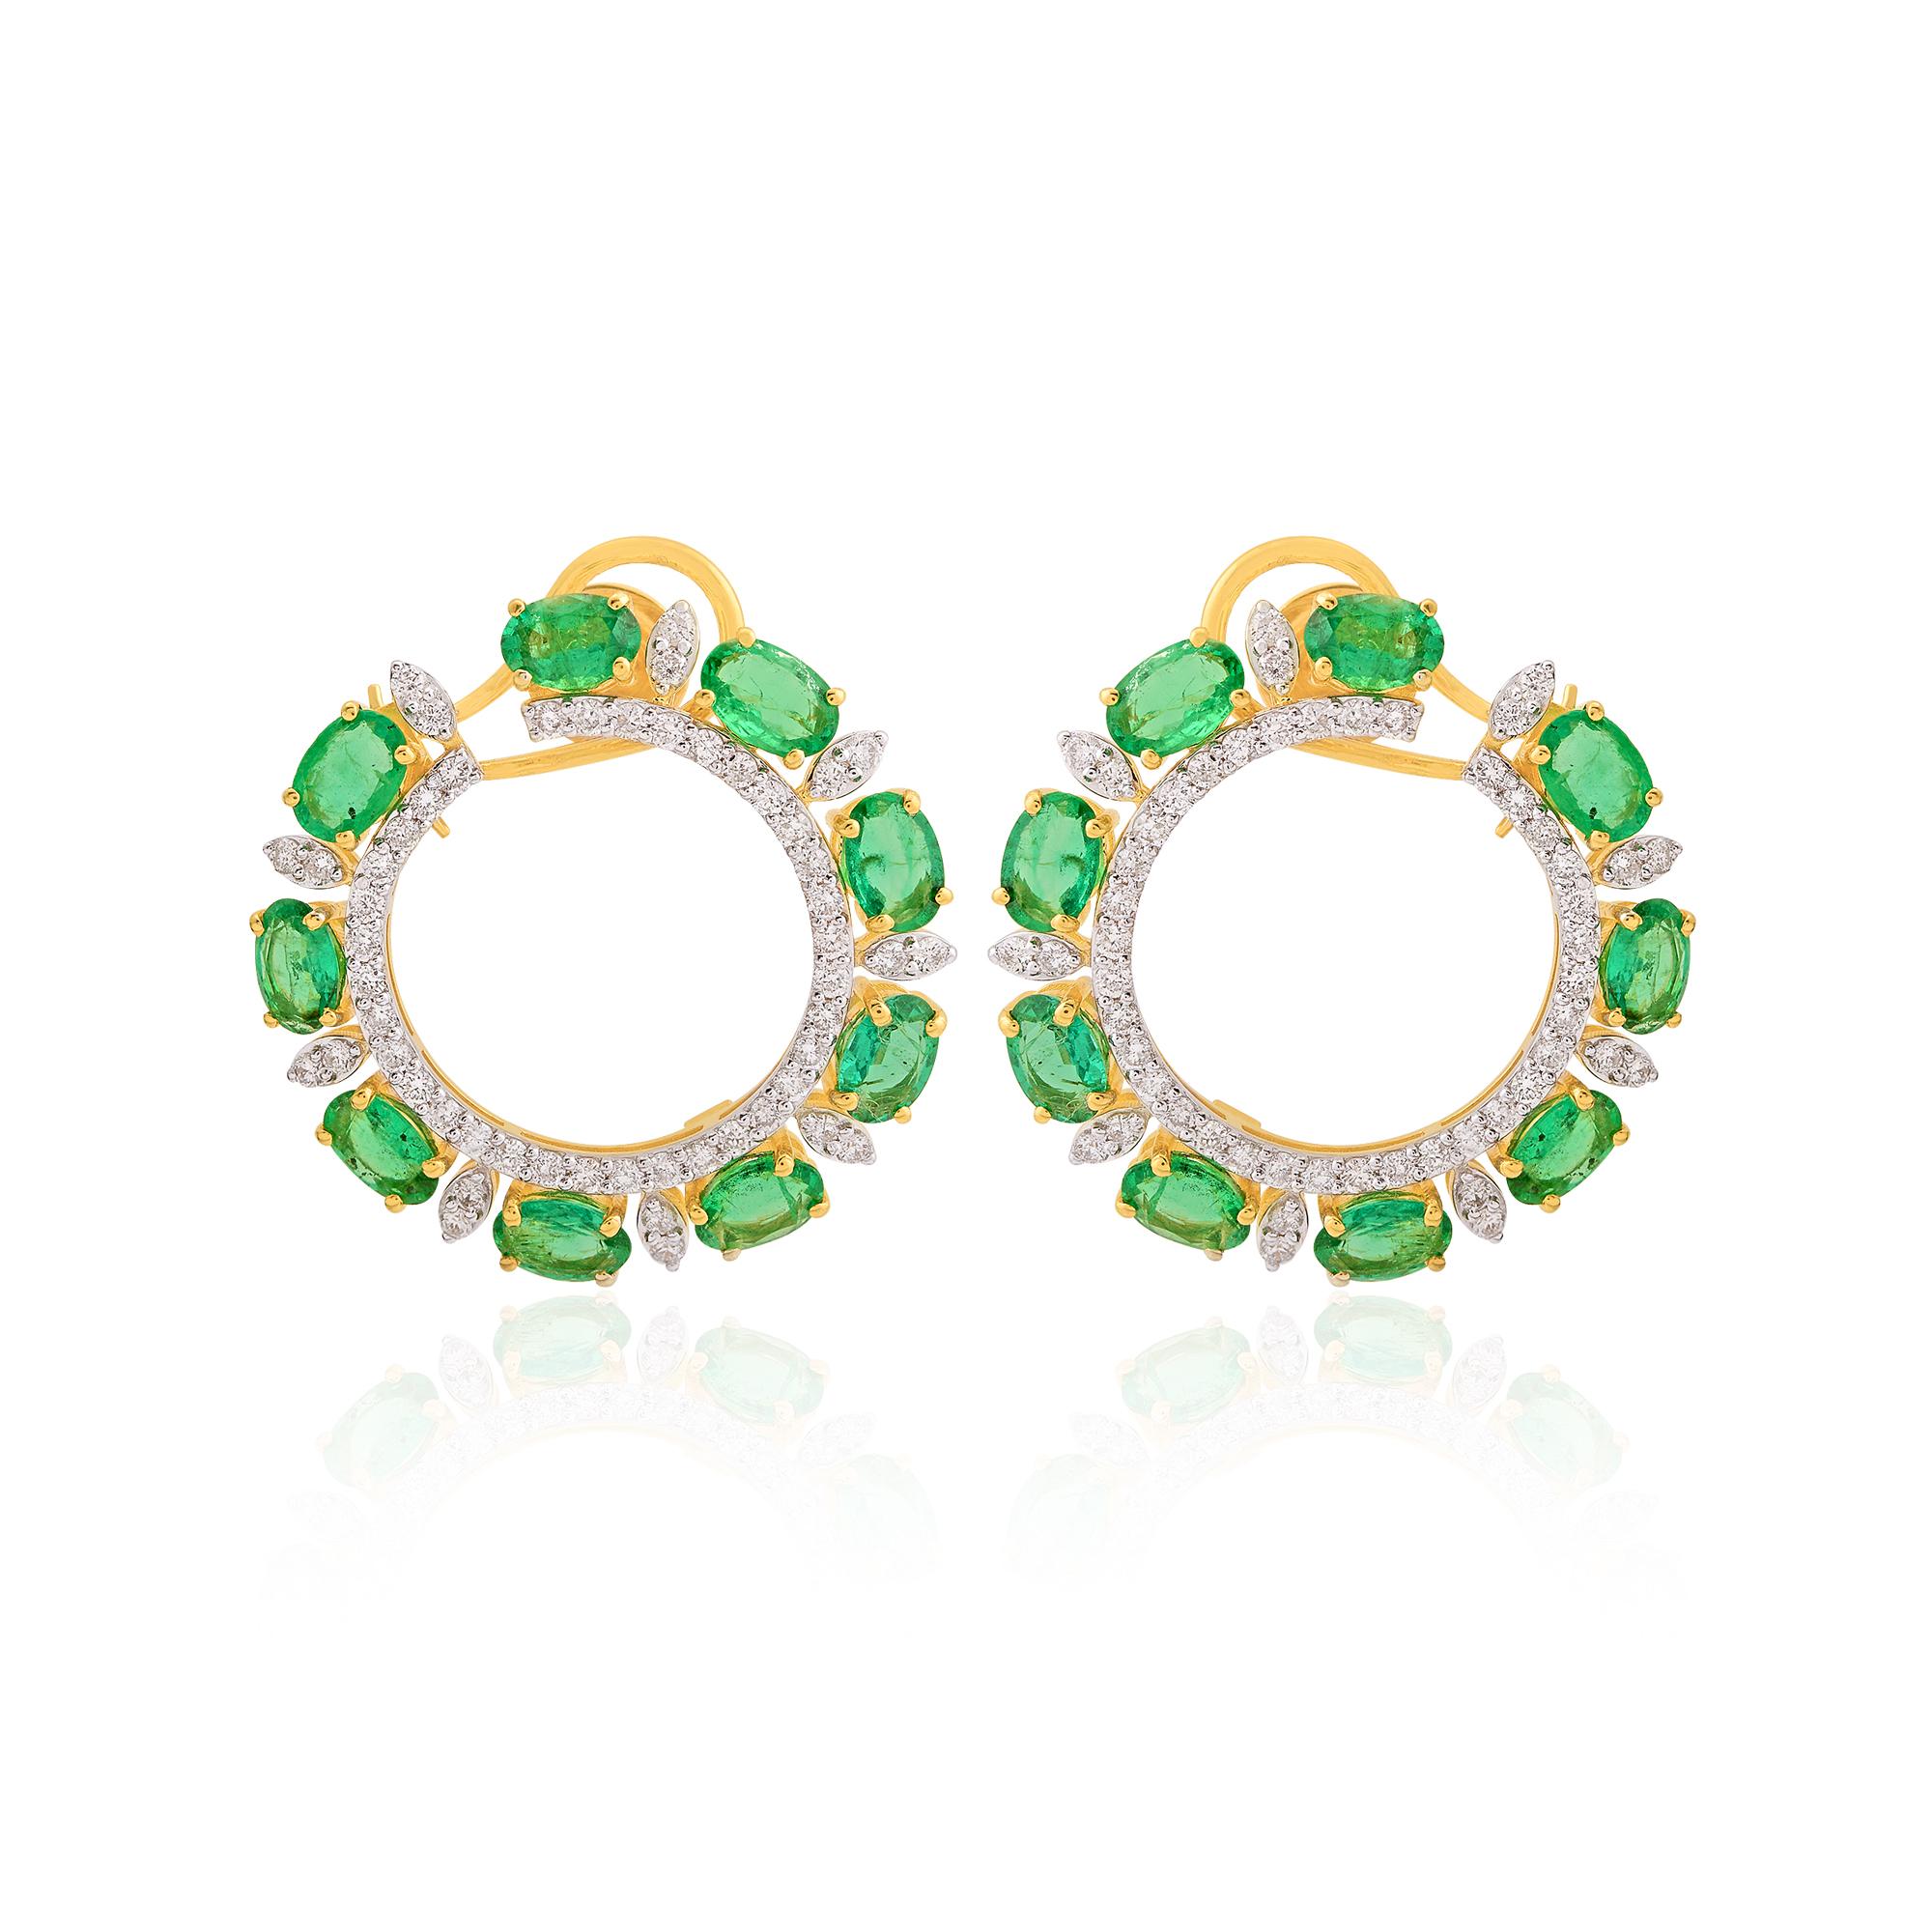 Item Code :- SEE-1035D
Gross Wt. :- 12.73 gm
18k Solid Yellow Gold Wt. :- 11.10 gm
Natural Diamond Wt. :- 1.51 Ct. ( AVERAGE DIAMOND CLARITY SI1-SI2 & COLOR H-I )
Zambian Emerald Wt. :- 6.66 Ct.
Earrings Size :- 25 mm approx.

✦